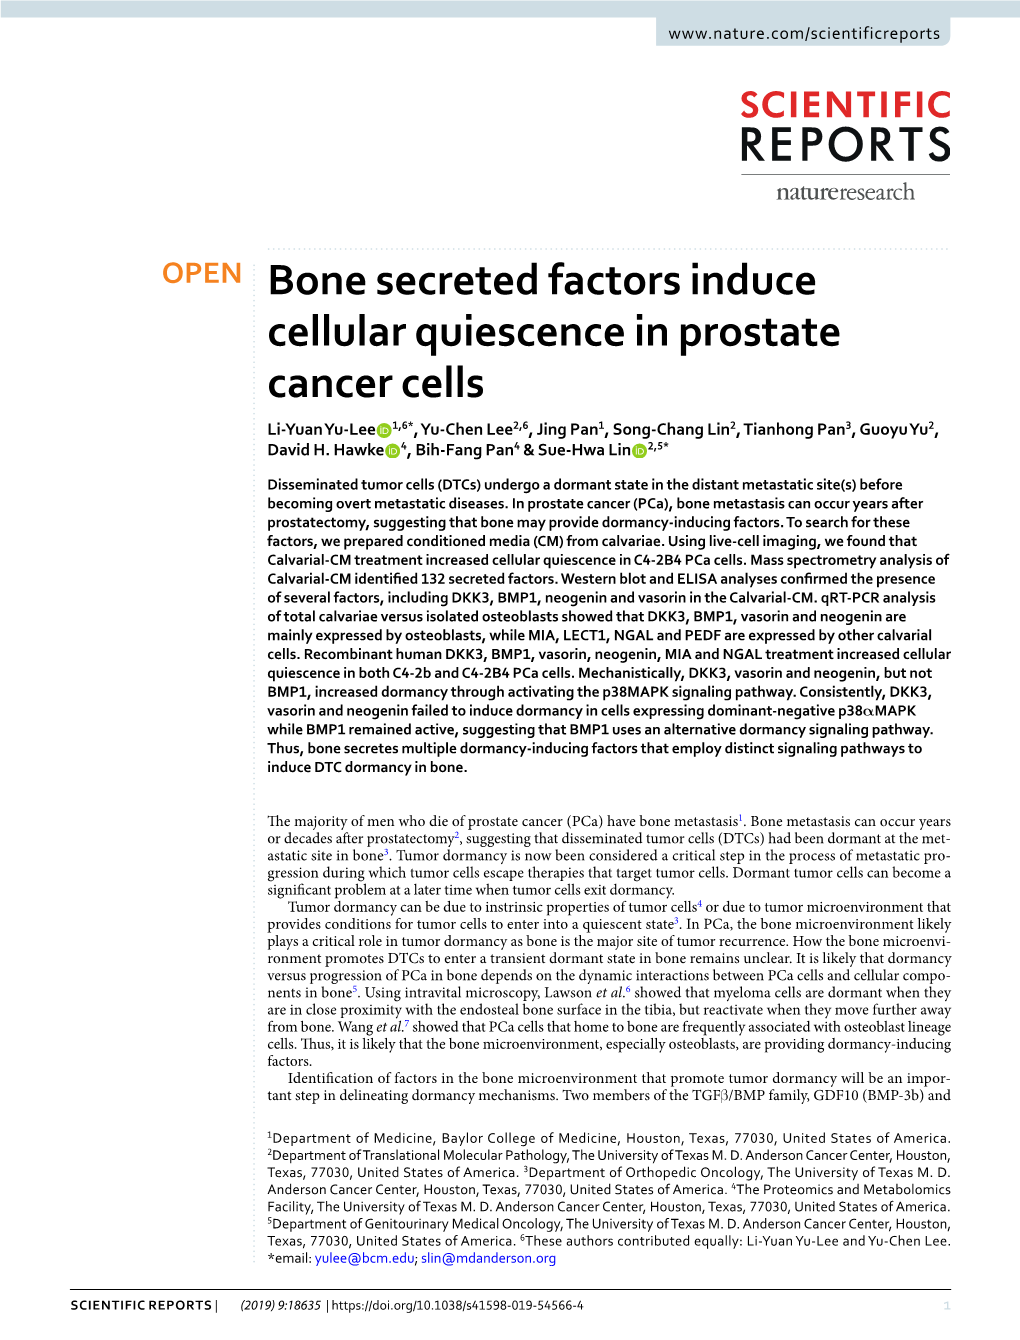 Bone Secreted Factors Induce Cellular Quiescence in Prostate Cancer Cells